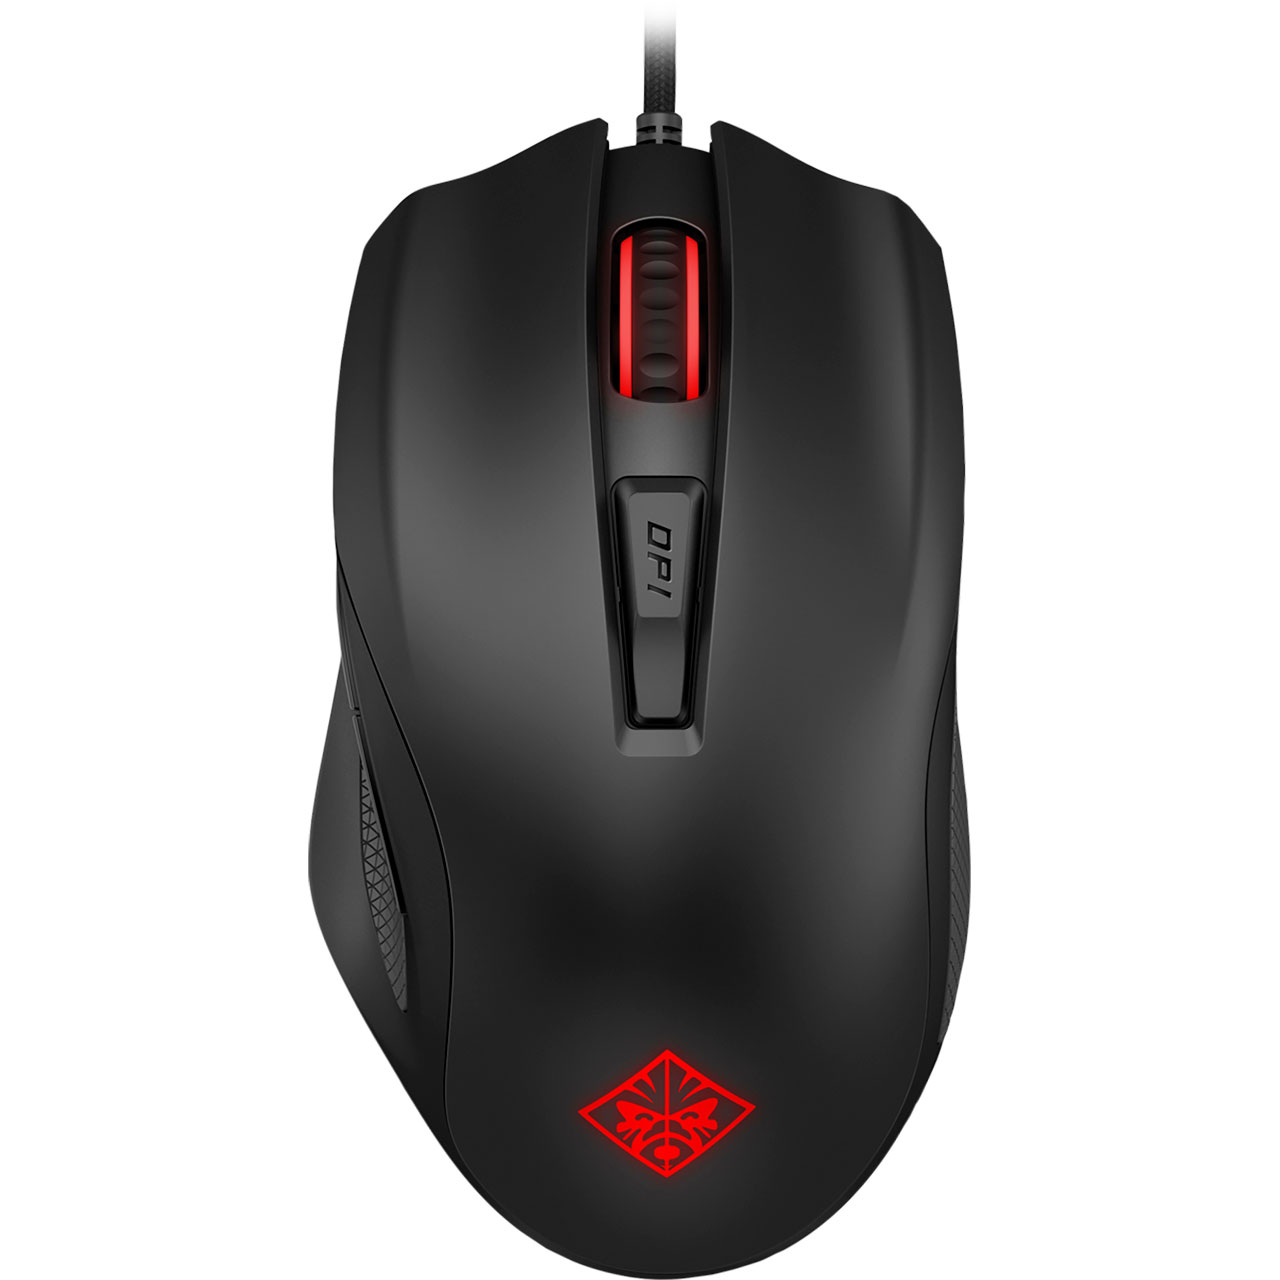 HP Wired USB Optical Mouse Review